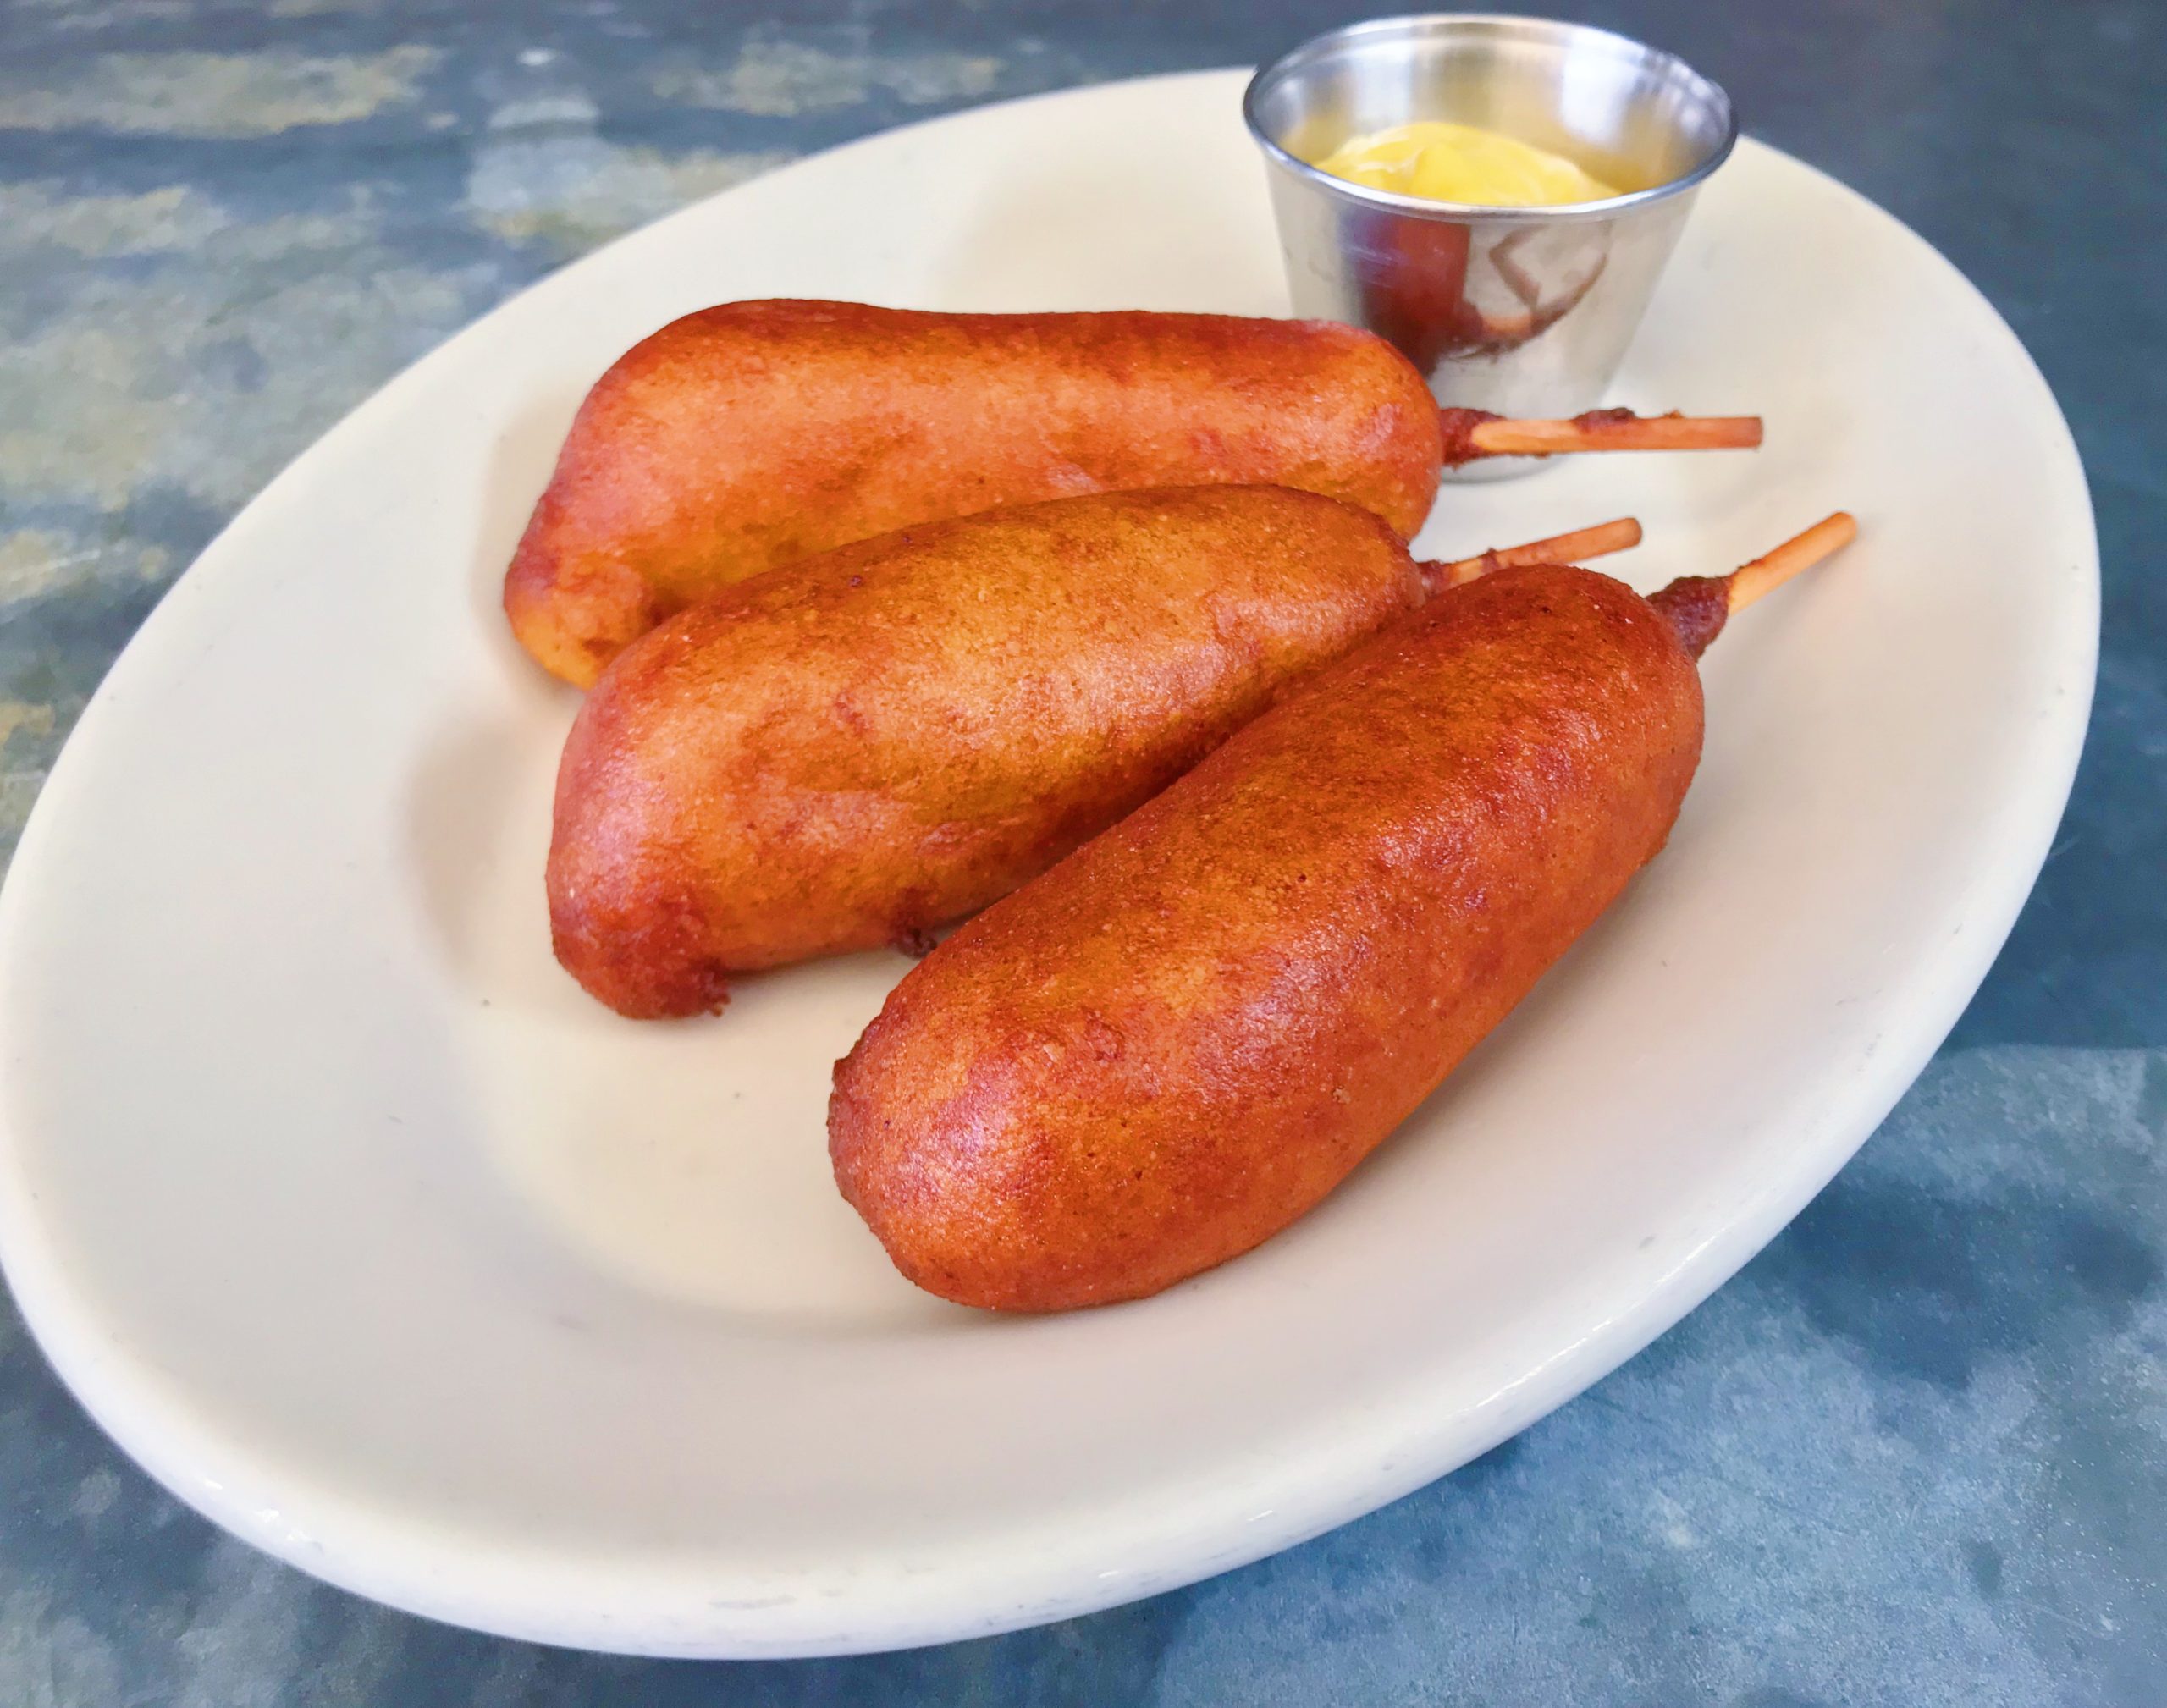 Get your Corn Dogs at the Roadhouse!